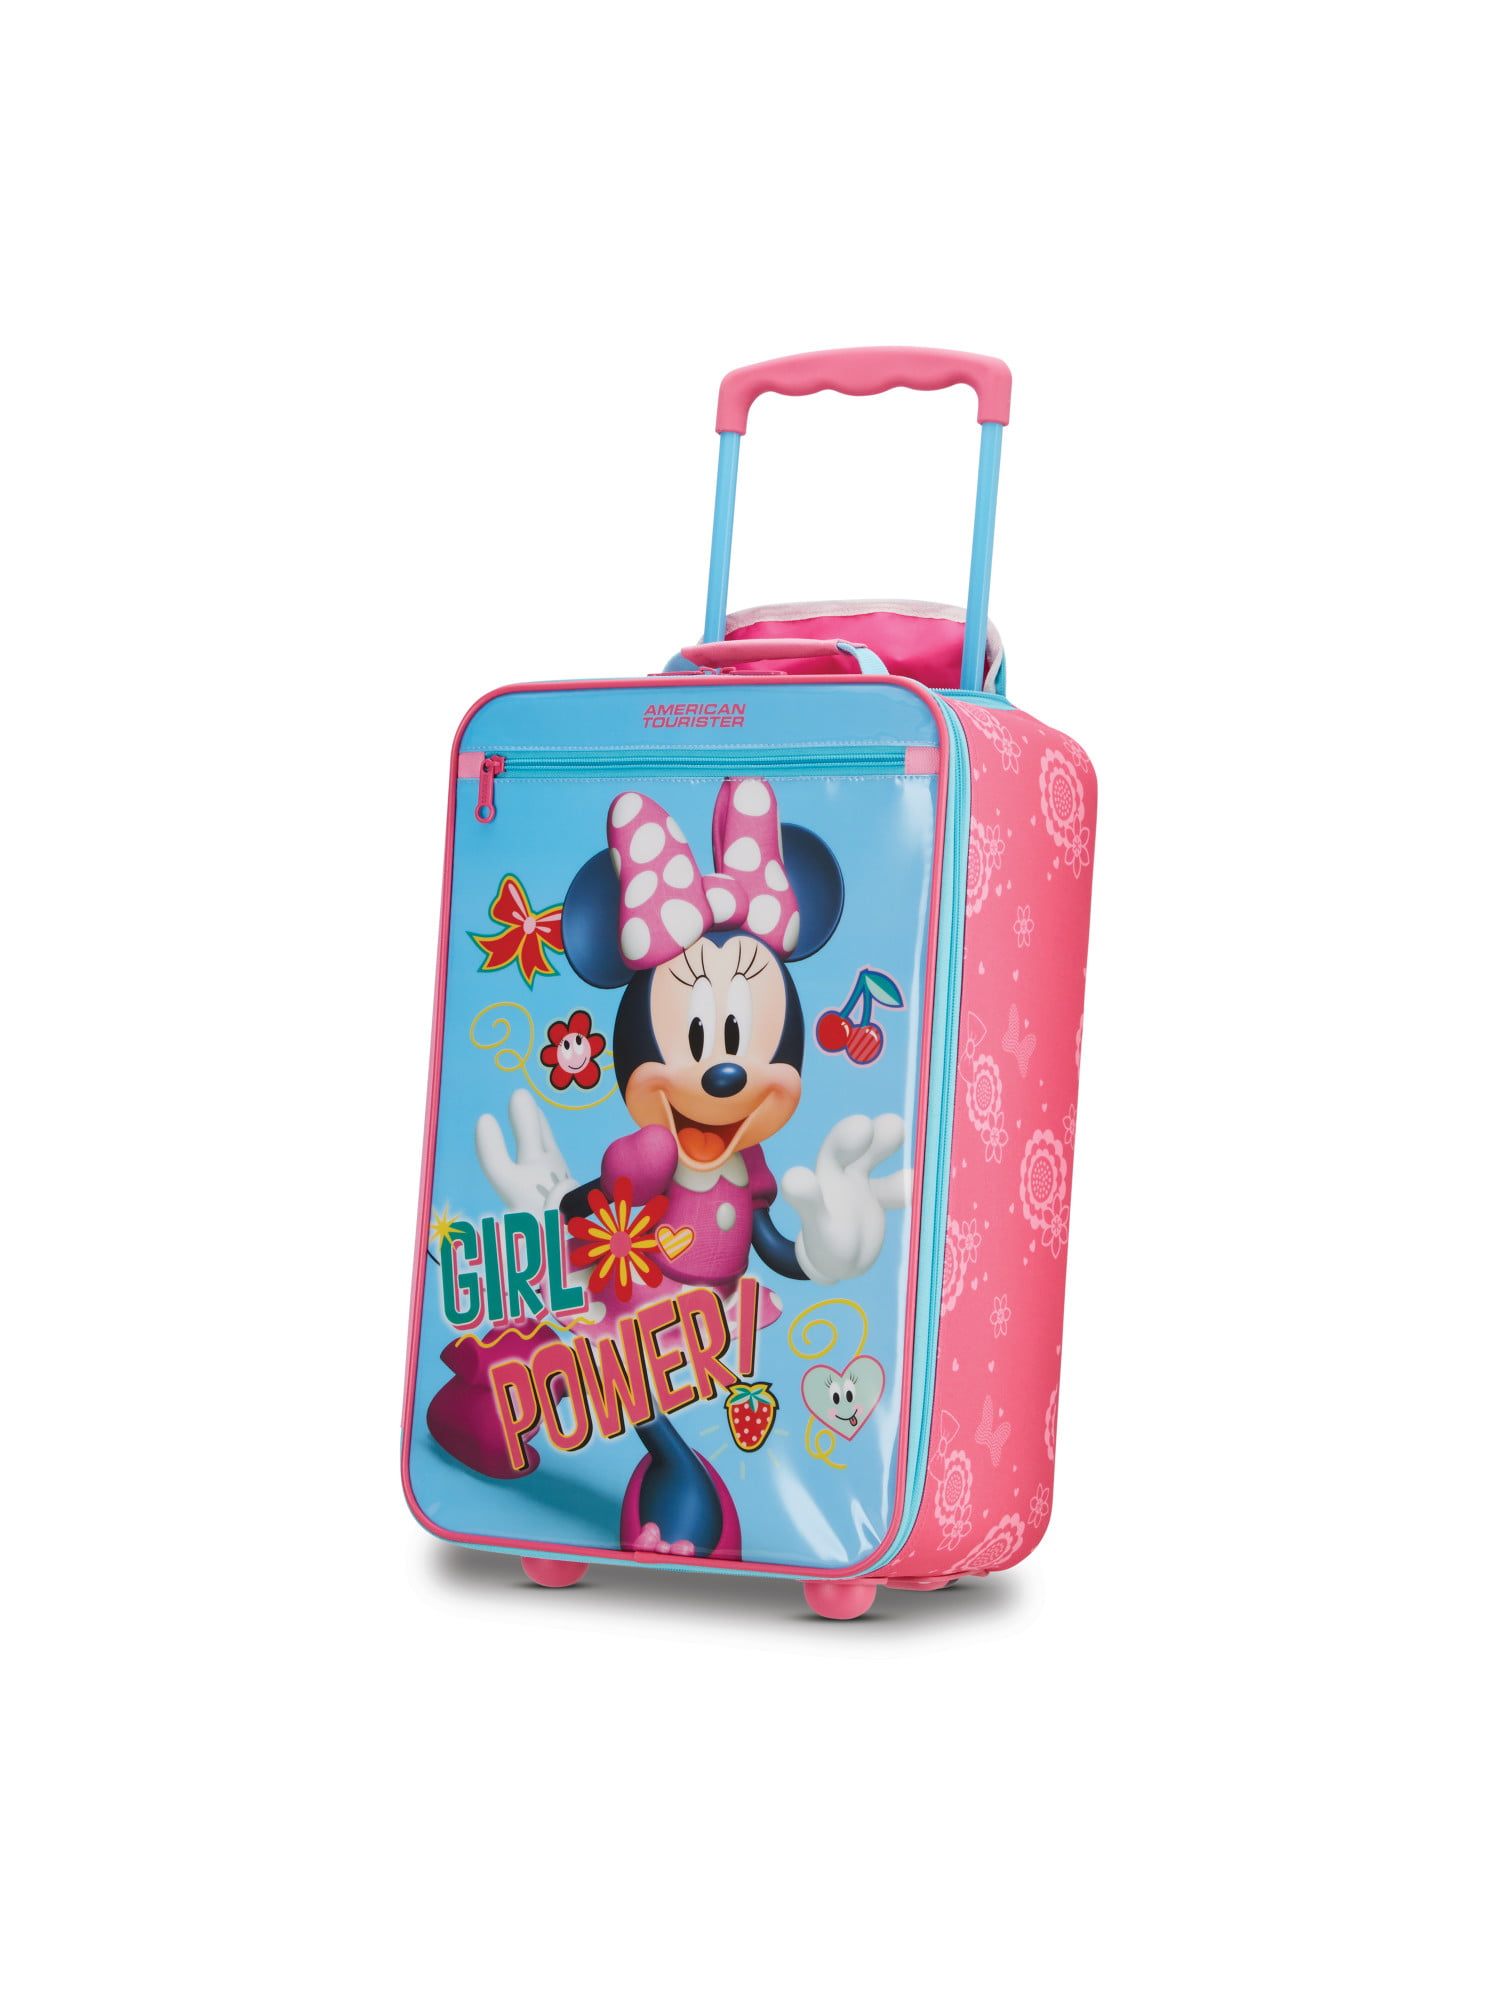 Disney Minnie Mouse Luggage for Kids 18 Inches Hard Sided Egg Shaped Kids Suitcase 